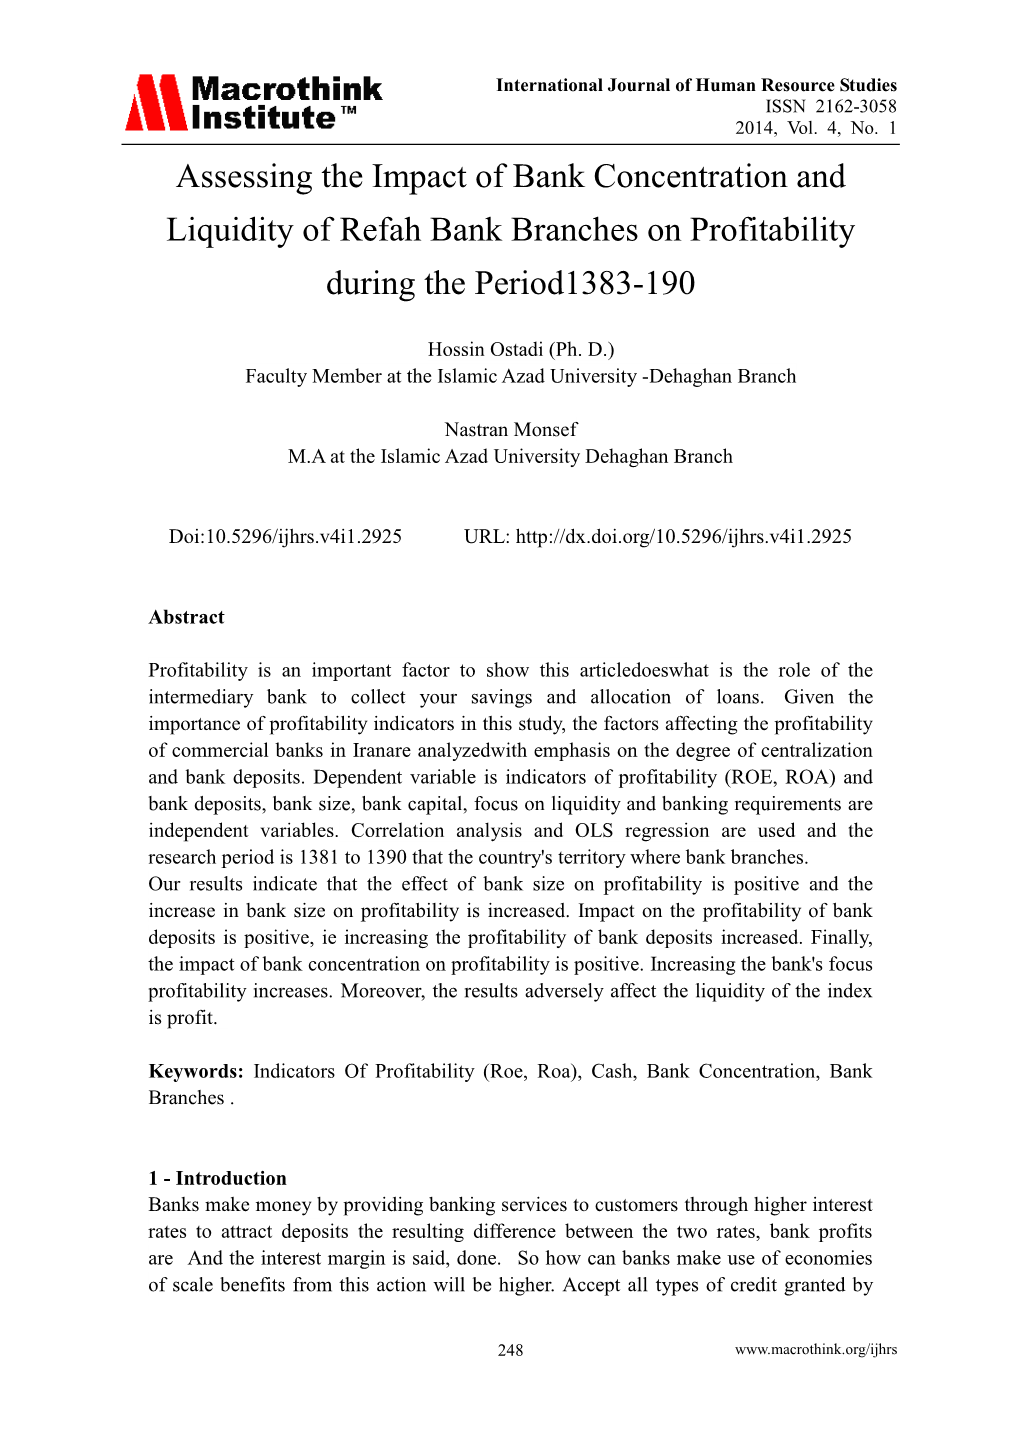 Assessing the Impact of Bank Concentration and Liquidity of Refah Bank Branches on Profitability During the Period1383-190